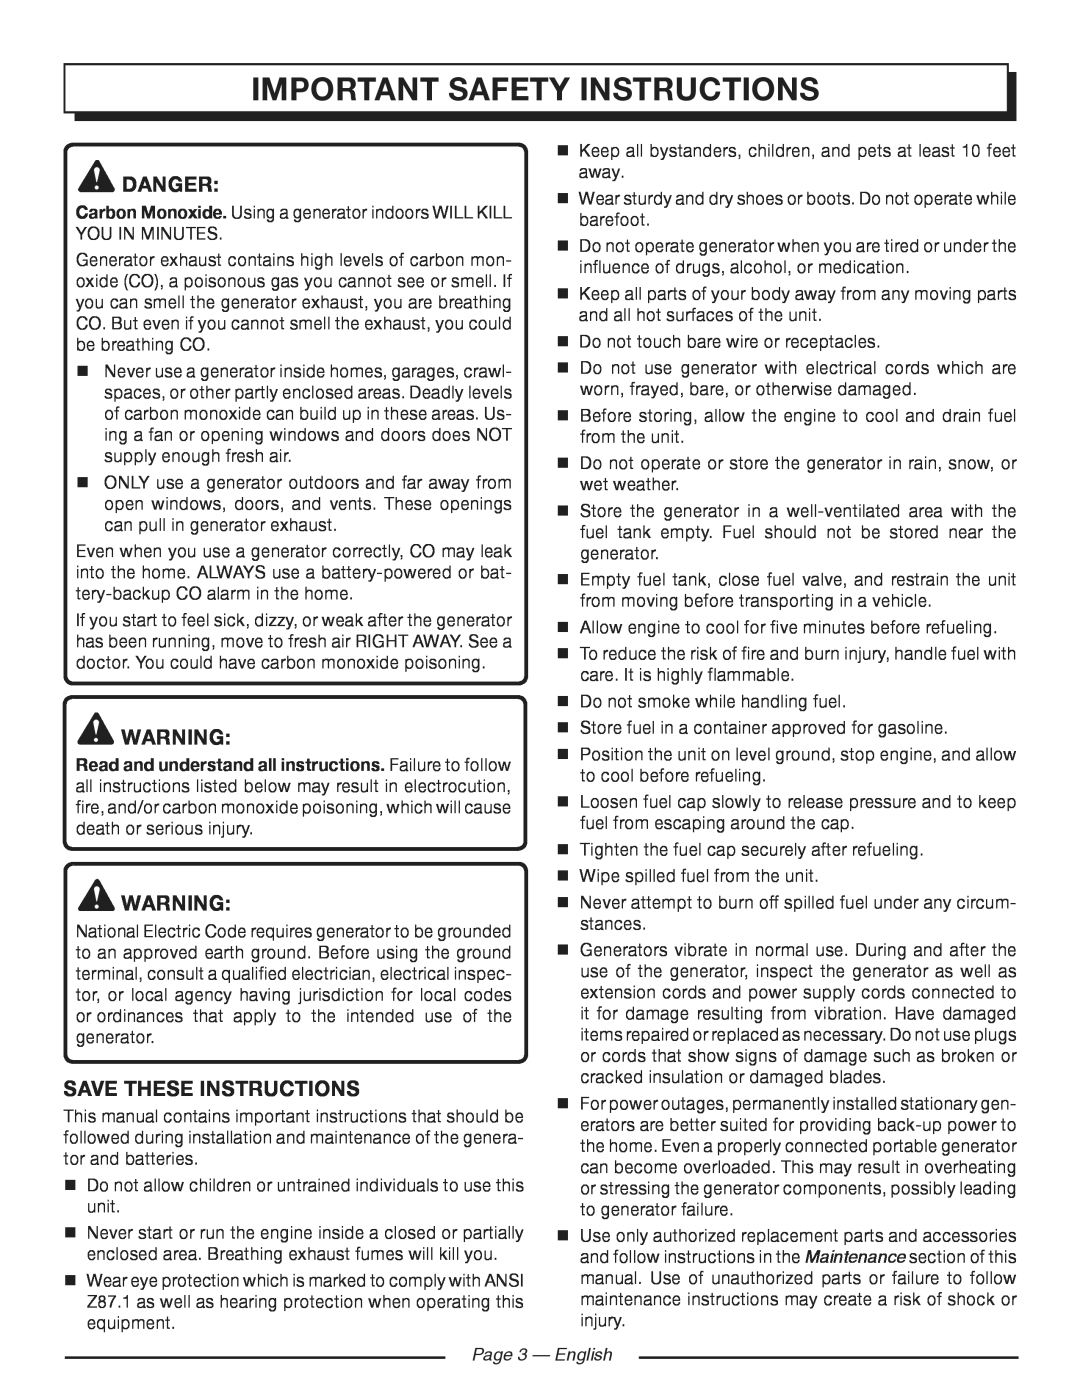 Homelite HGCA3000 manuel dutilisation important safety instructions, Danger, Save These Instructions, Page 3 - English 